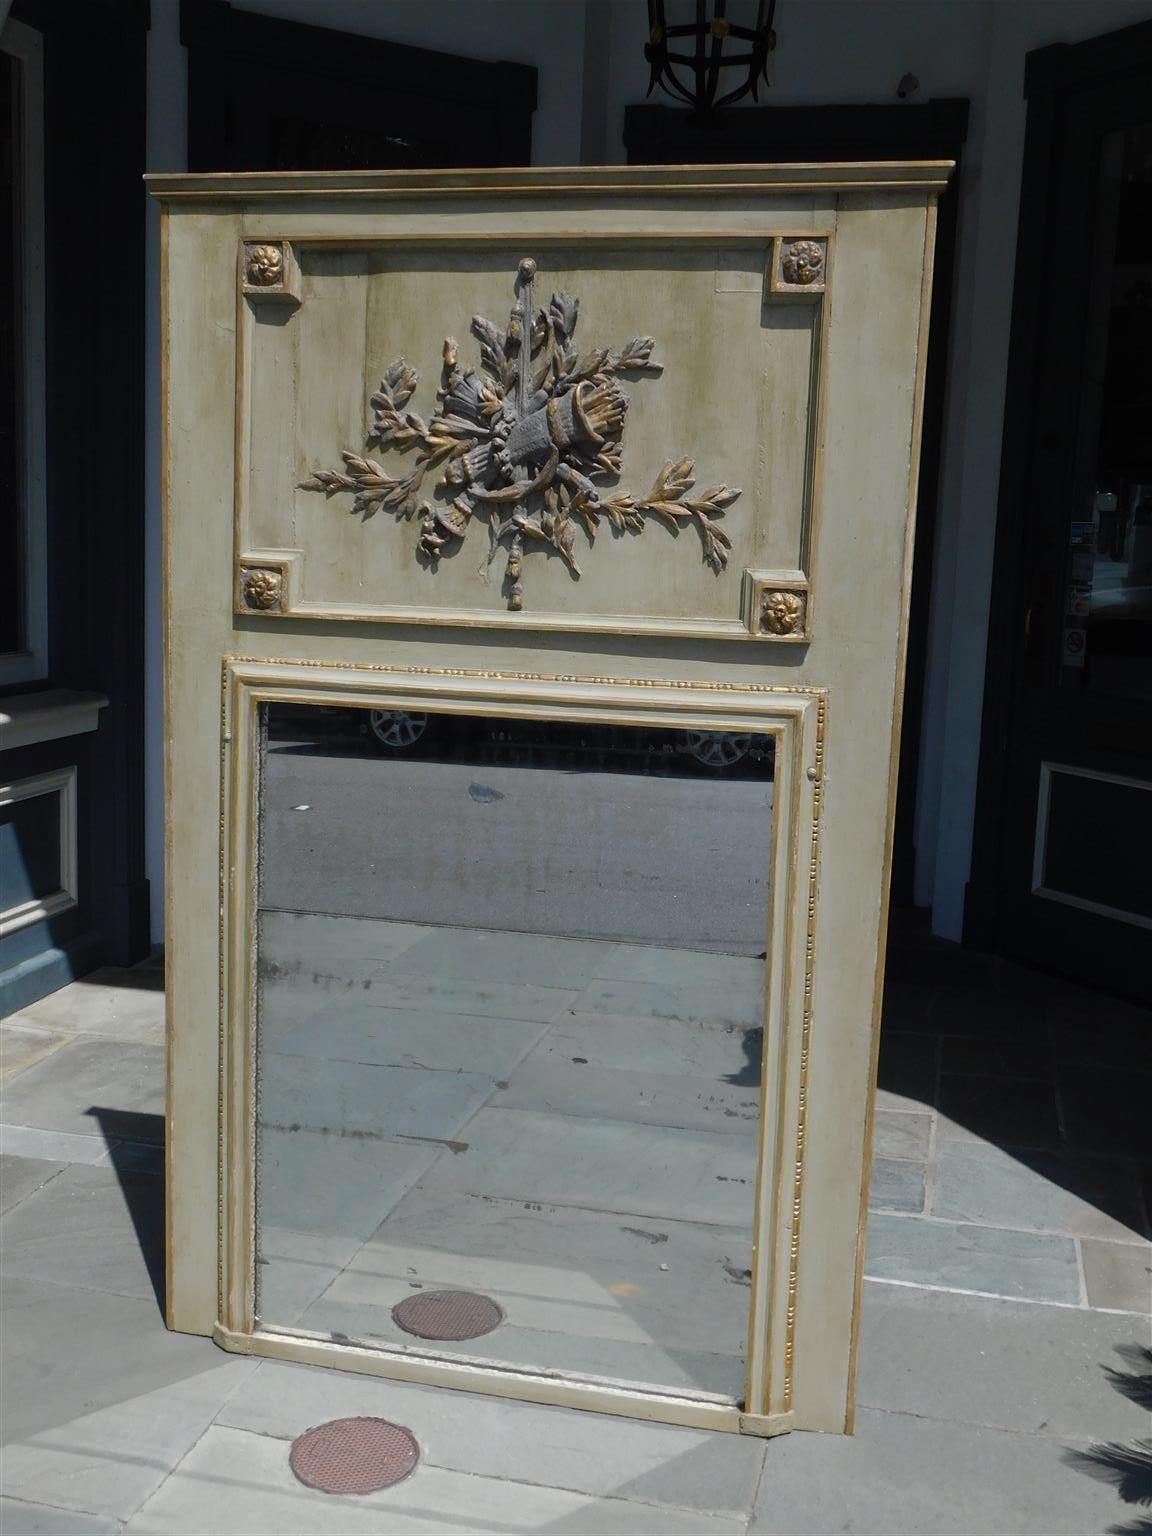 French Trumeau painted and gilt carved wood gesso wall mirror with quiver of arrows, tassels, intertwined foliage torchieres, gilt bead work, and flanking gilt corner medallions. Mirror retains the original silvered glass and wood backing. Late 18th